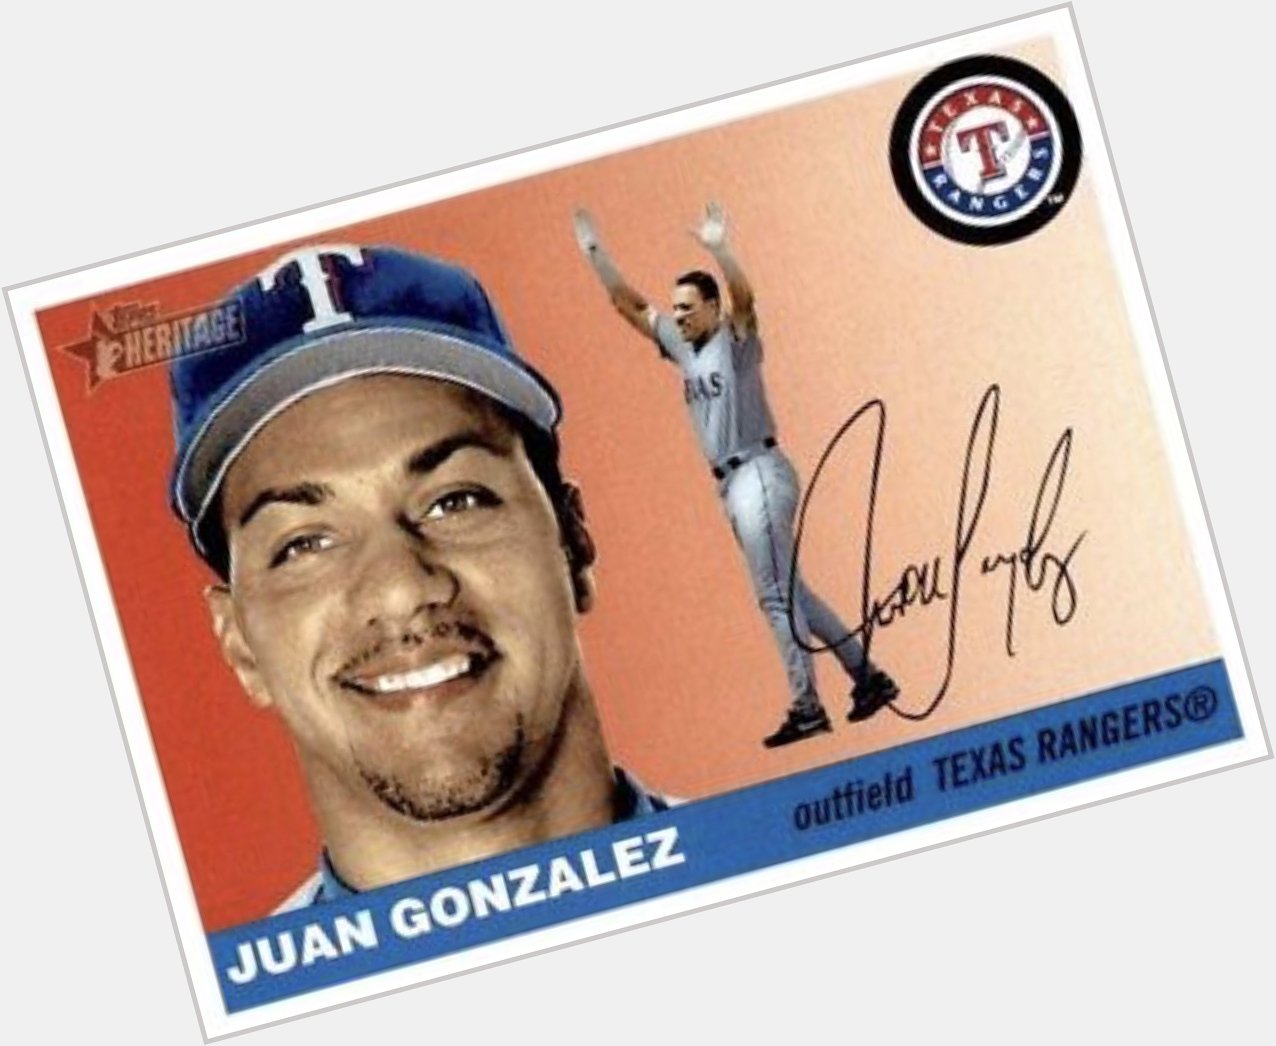 Happy Birthday to two time American League MVP Juan Gonzalez. He hit .286 (6-for-21) with the 2005 